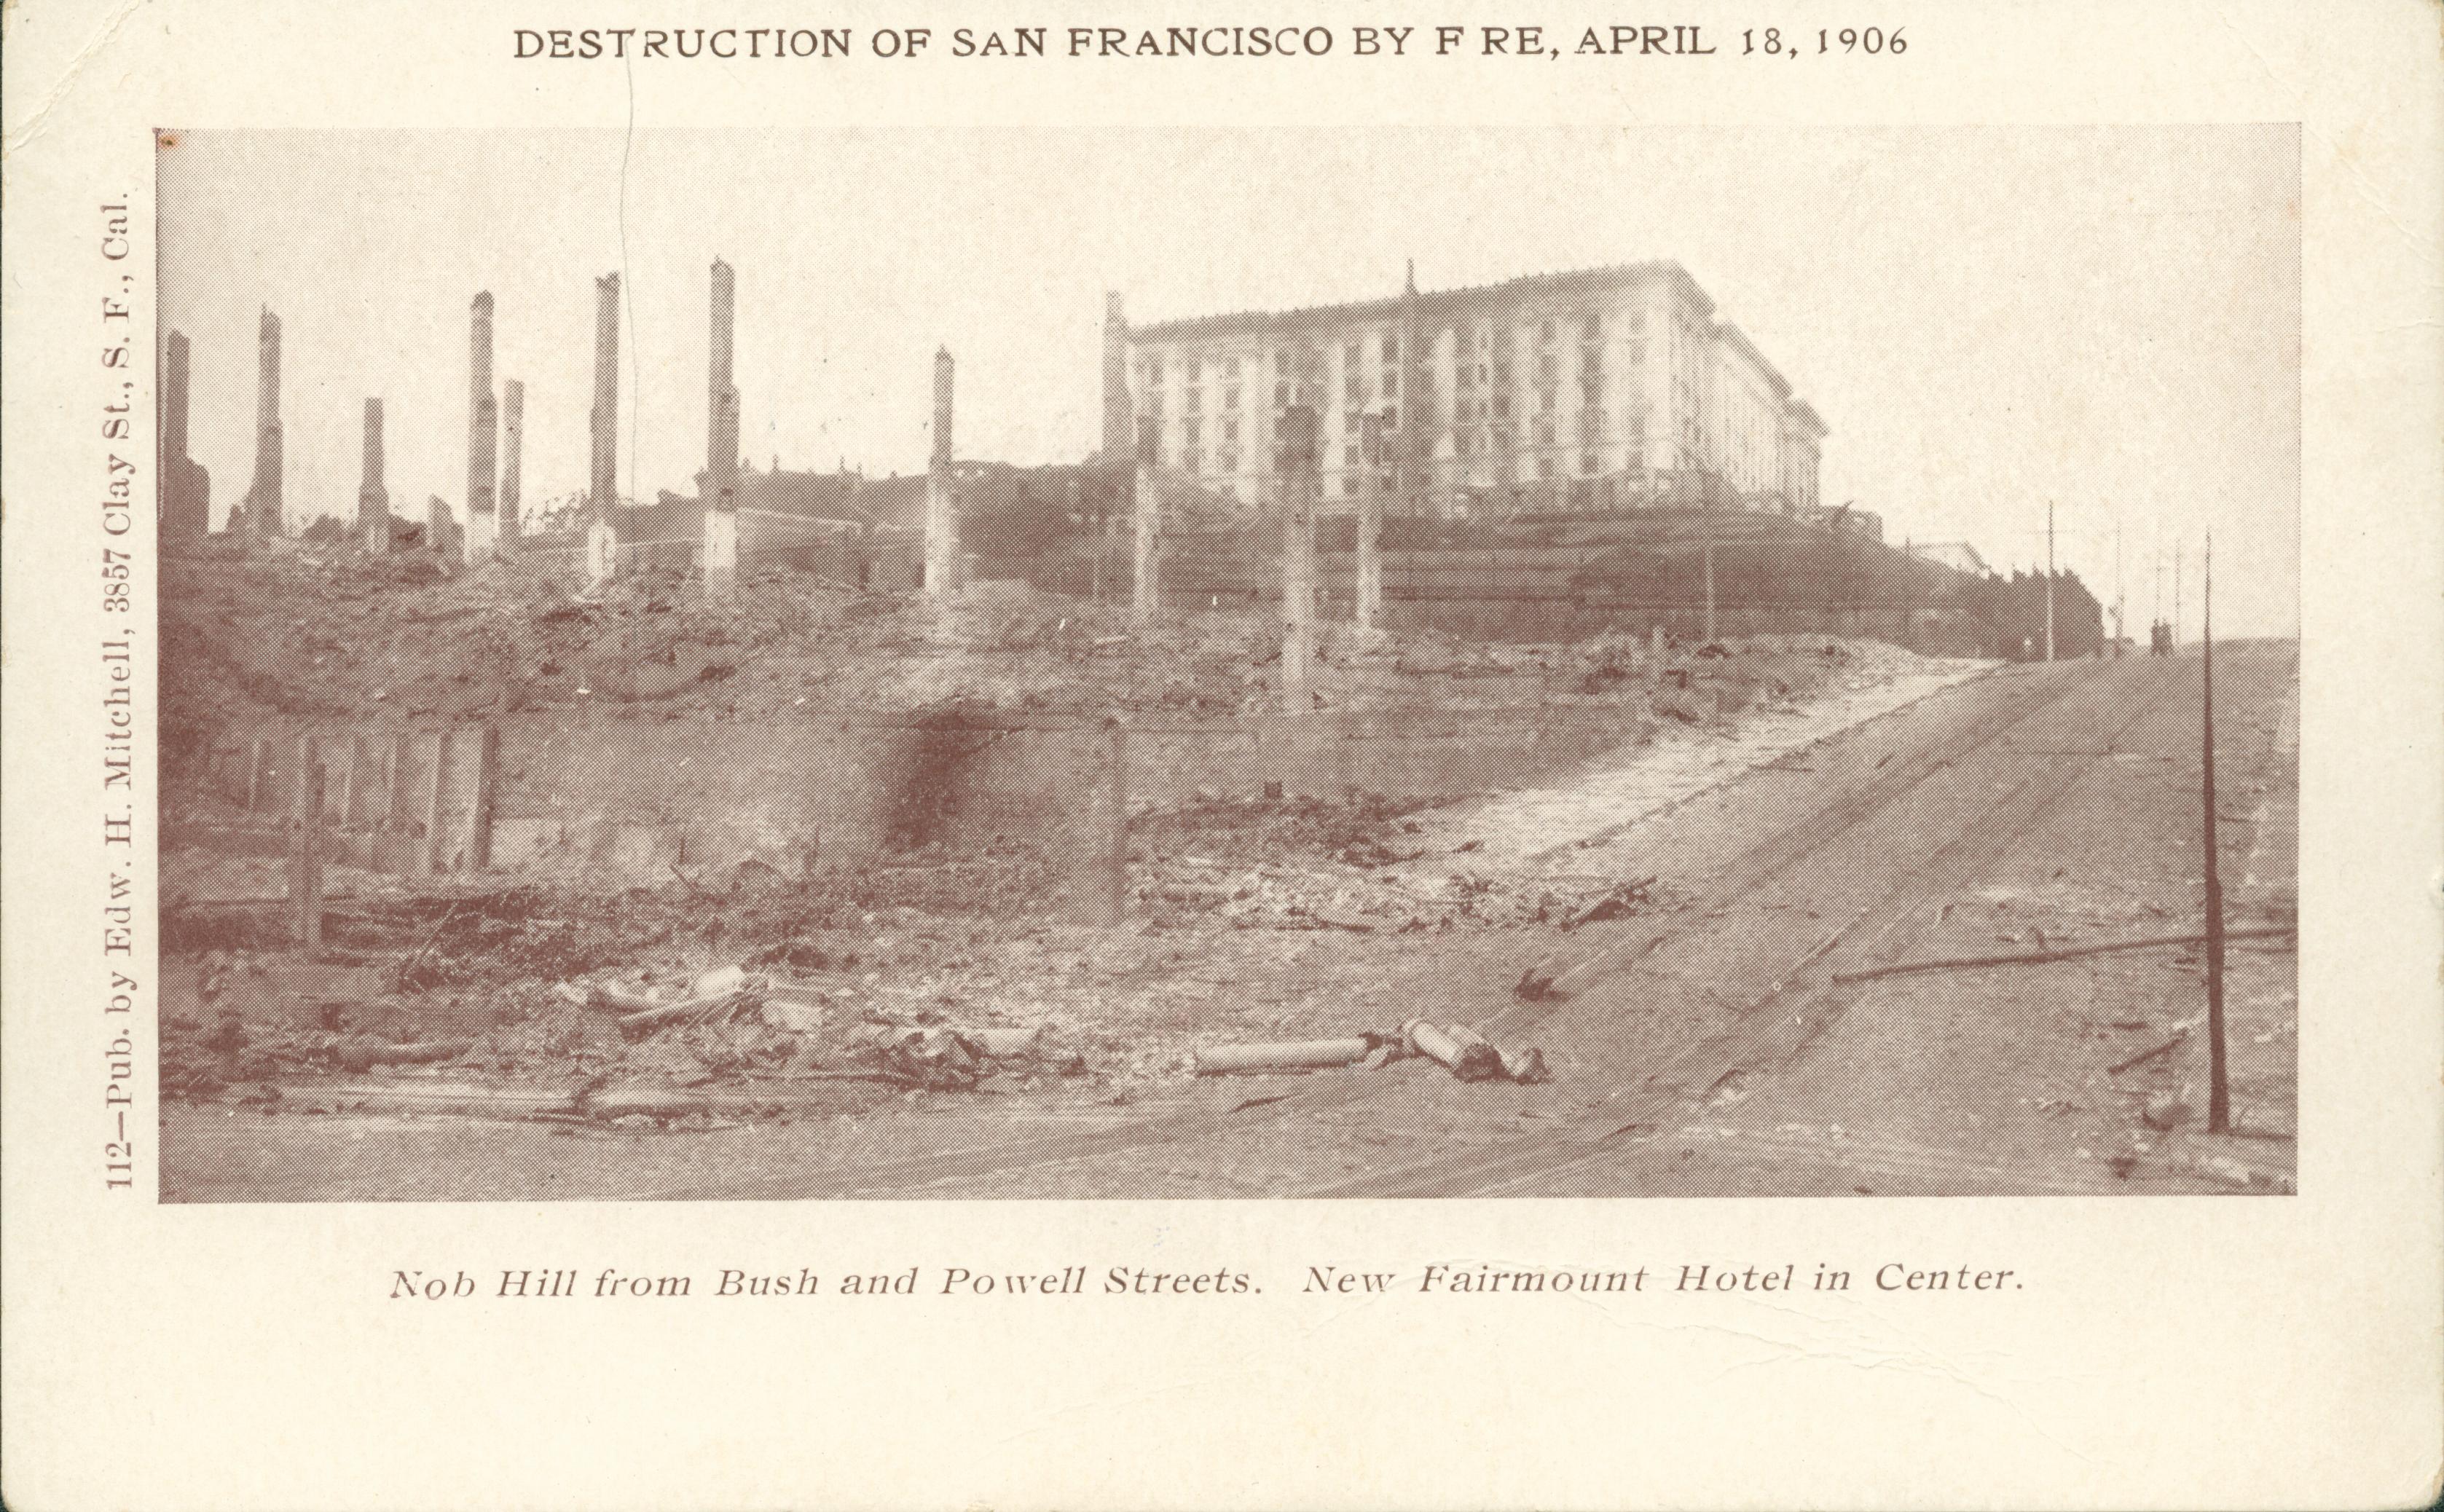 Shows the Fairmont Hotel on Nob Hill above several destroyed buildings.